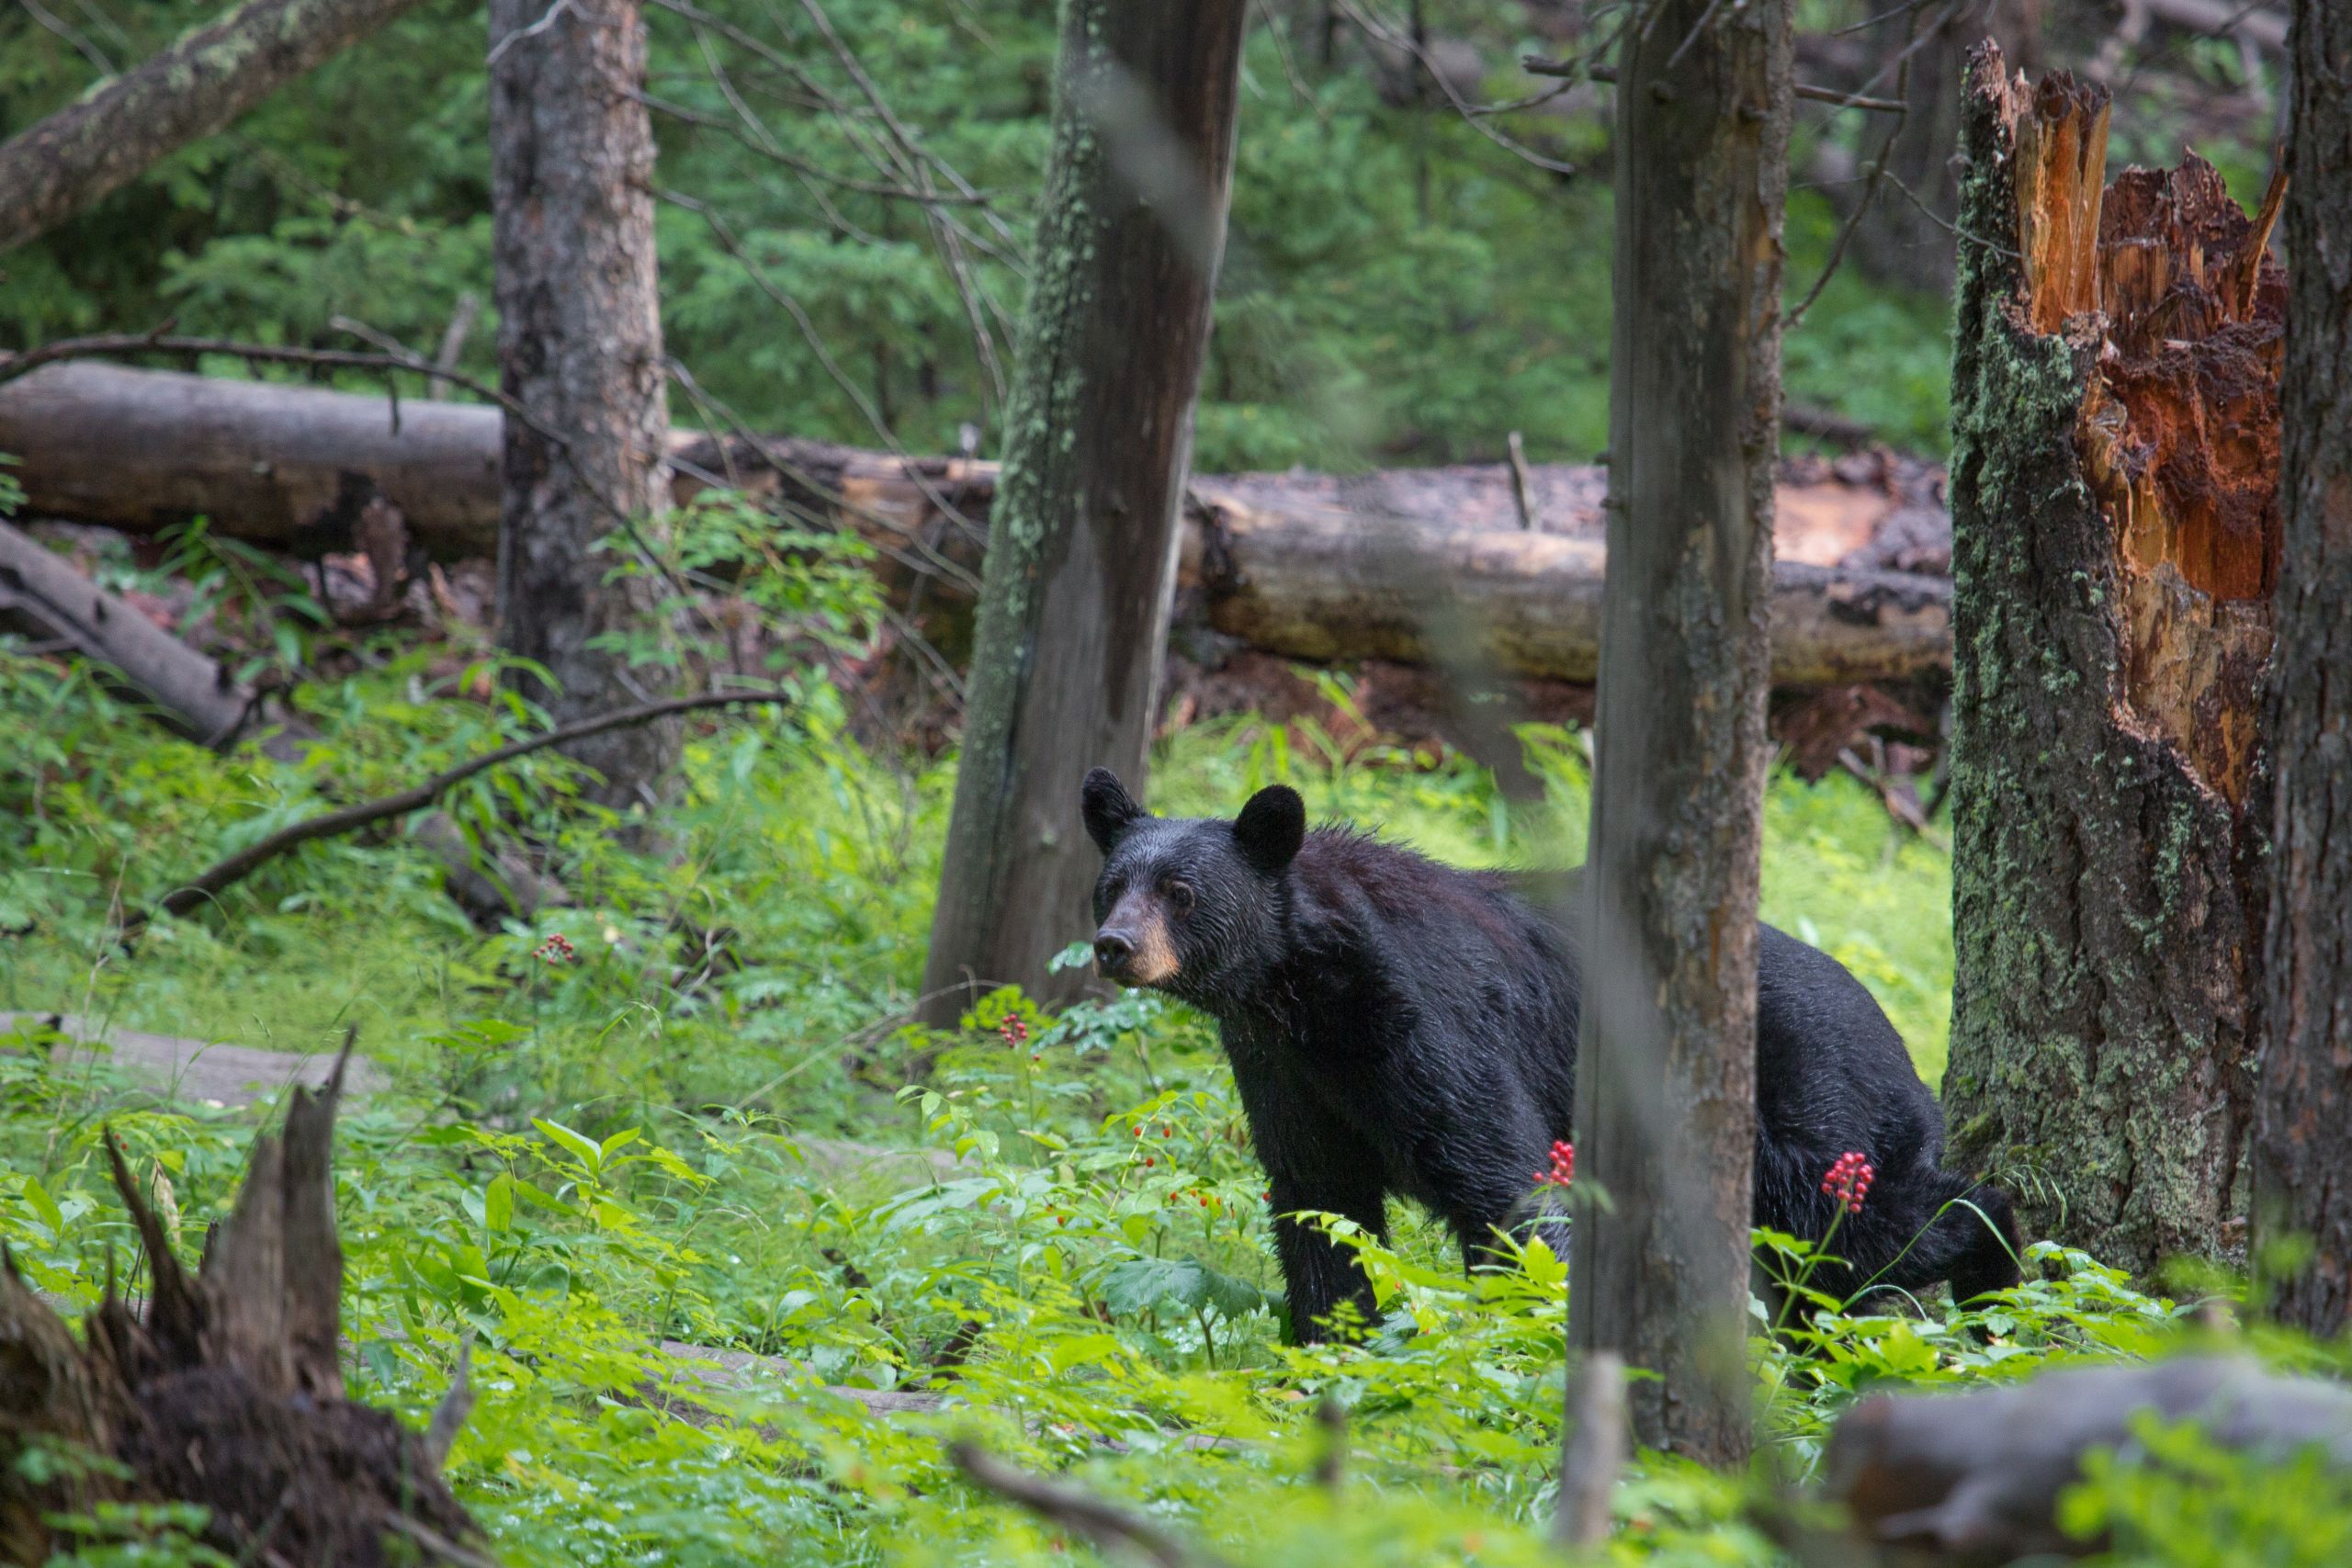 A black bear wandering the dense forest.